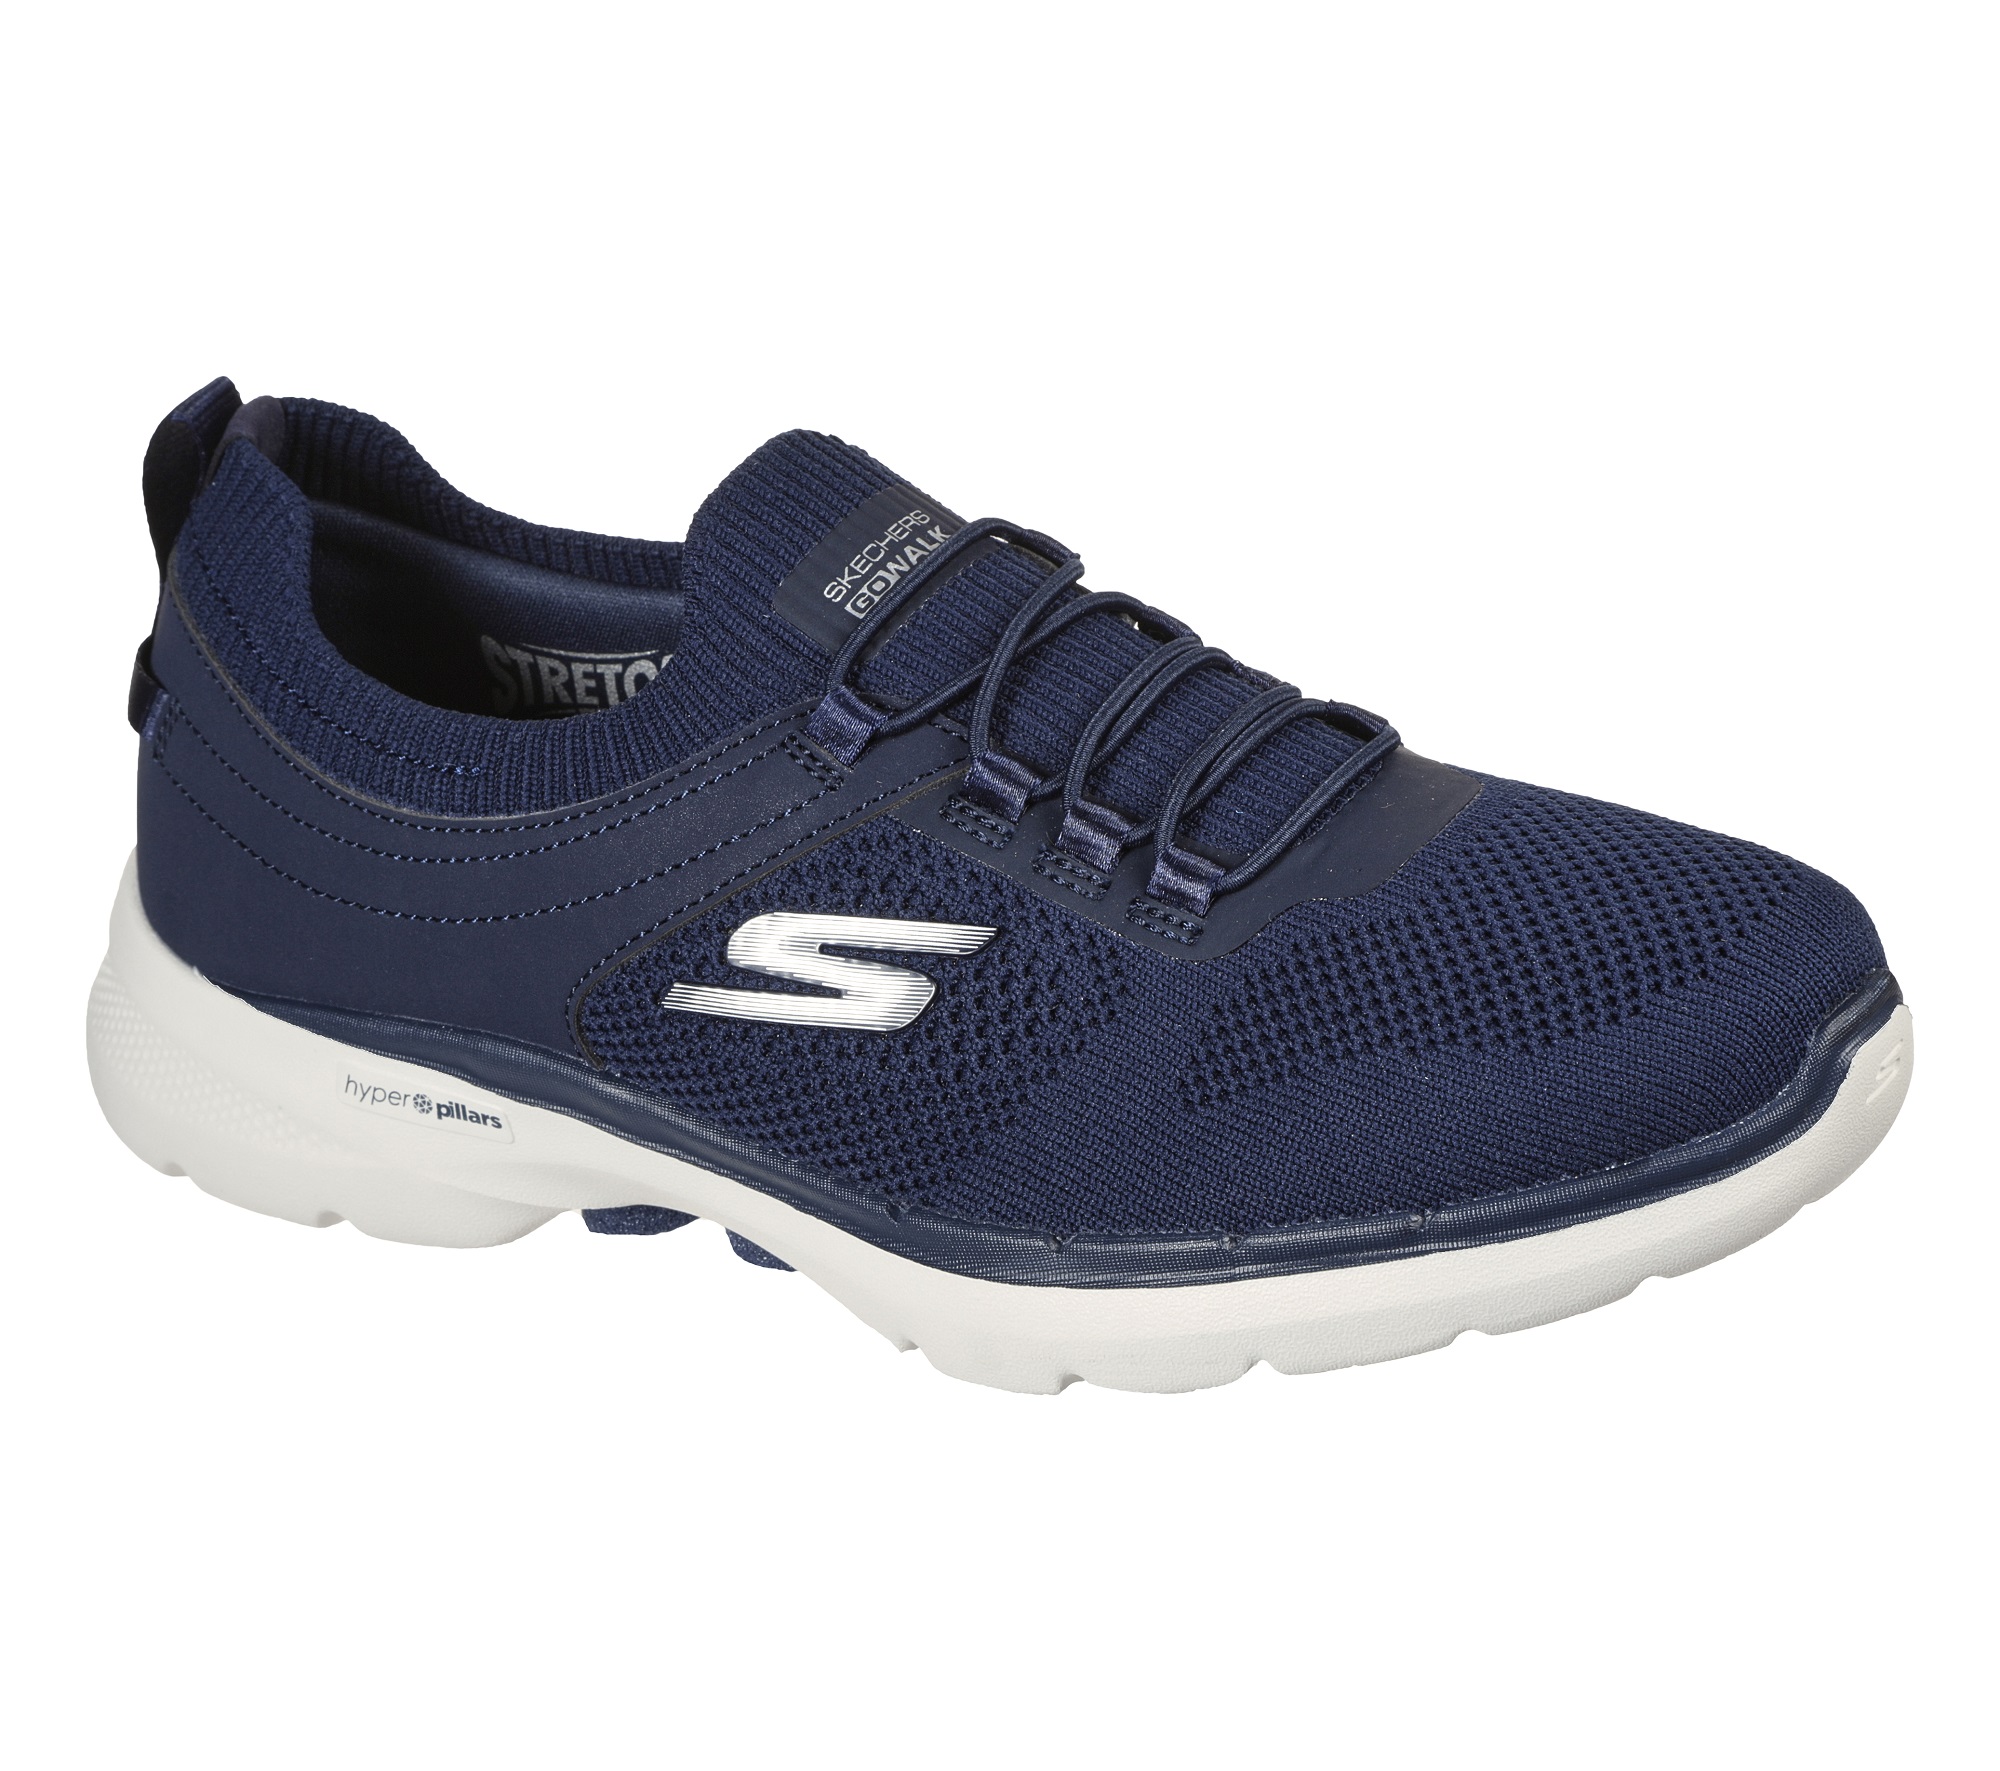 Skechers India continues championing walking with the launch of the GO WALK 6 decoding=